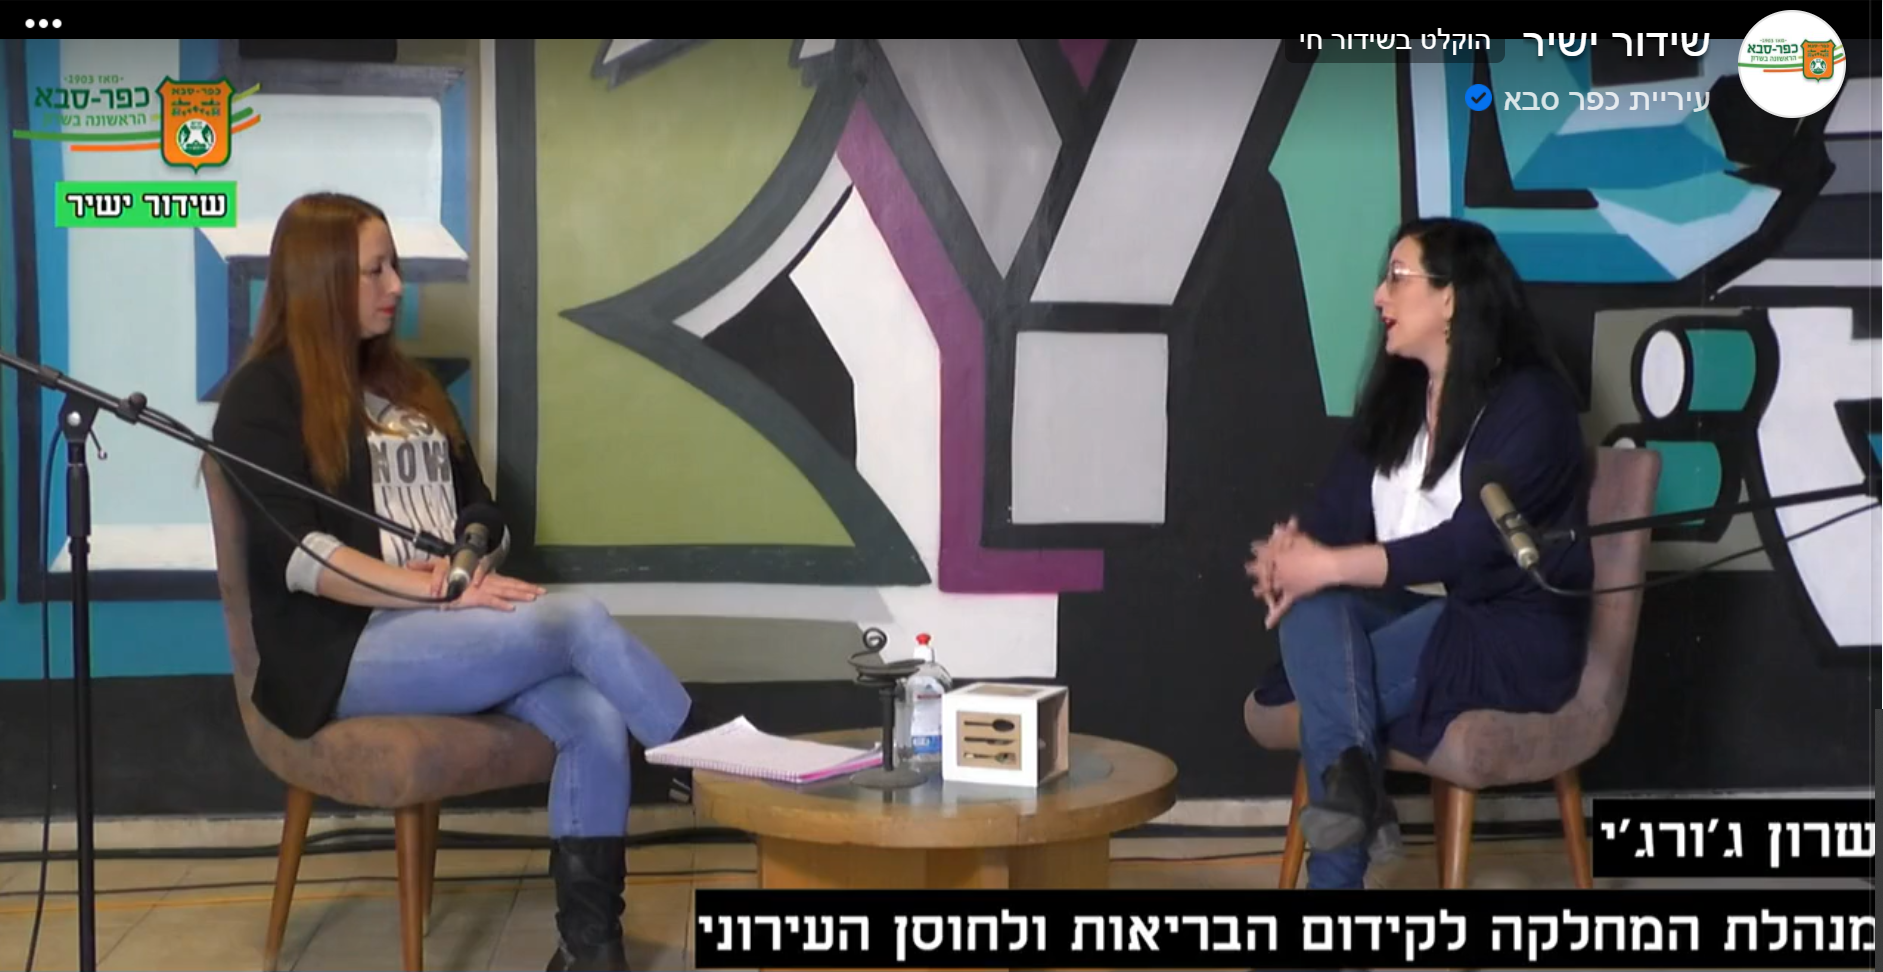 Broadcasting from the "Kfar Saba Live" studio at “Gallery 29”, the municipal Youth Music Center